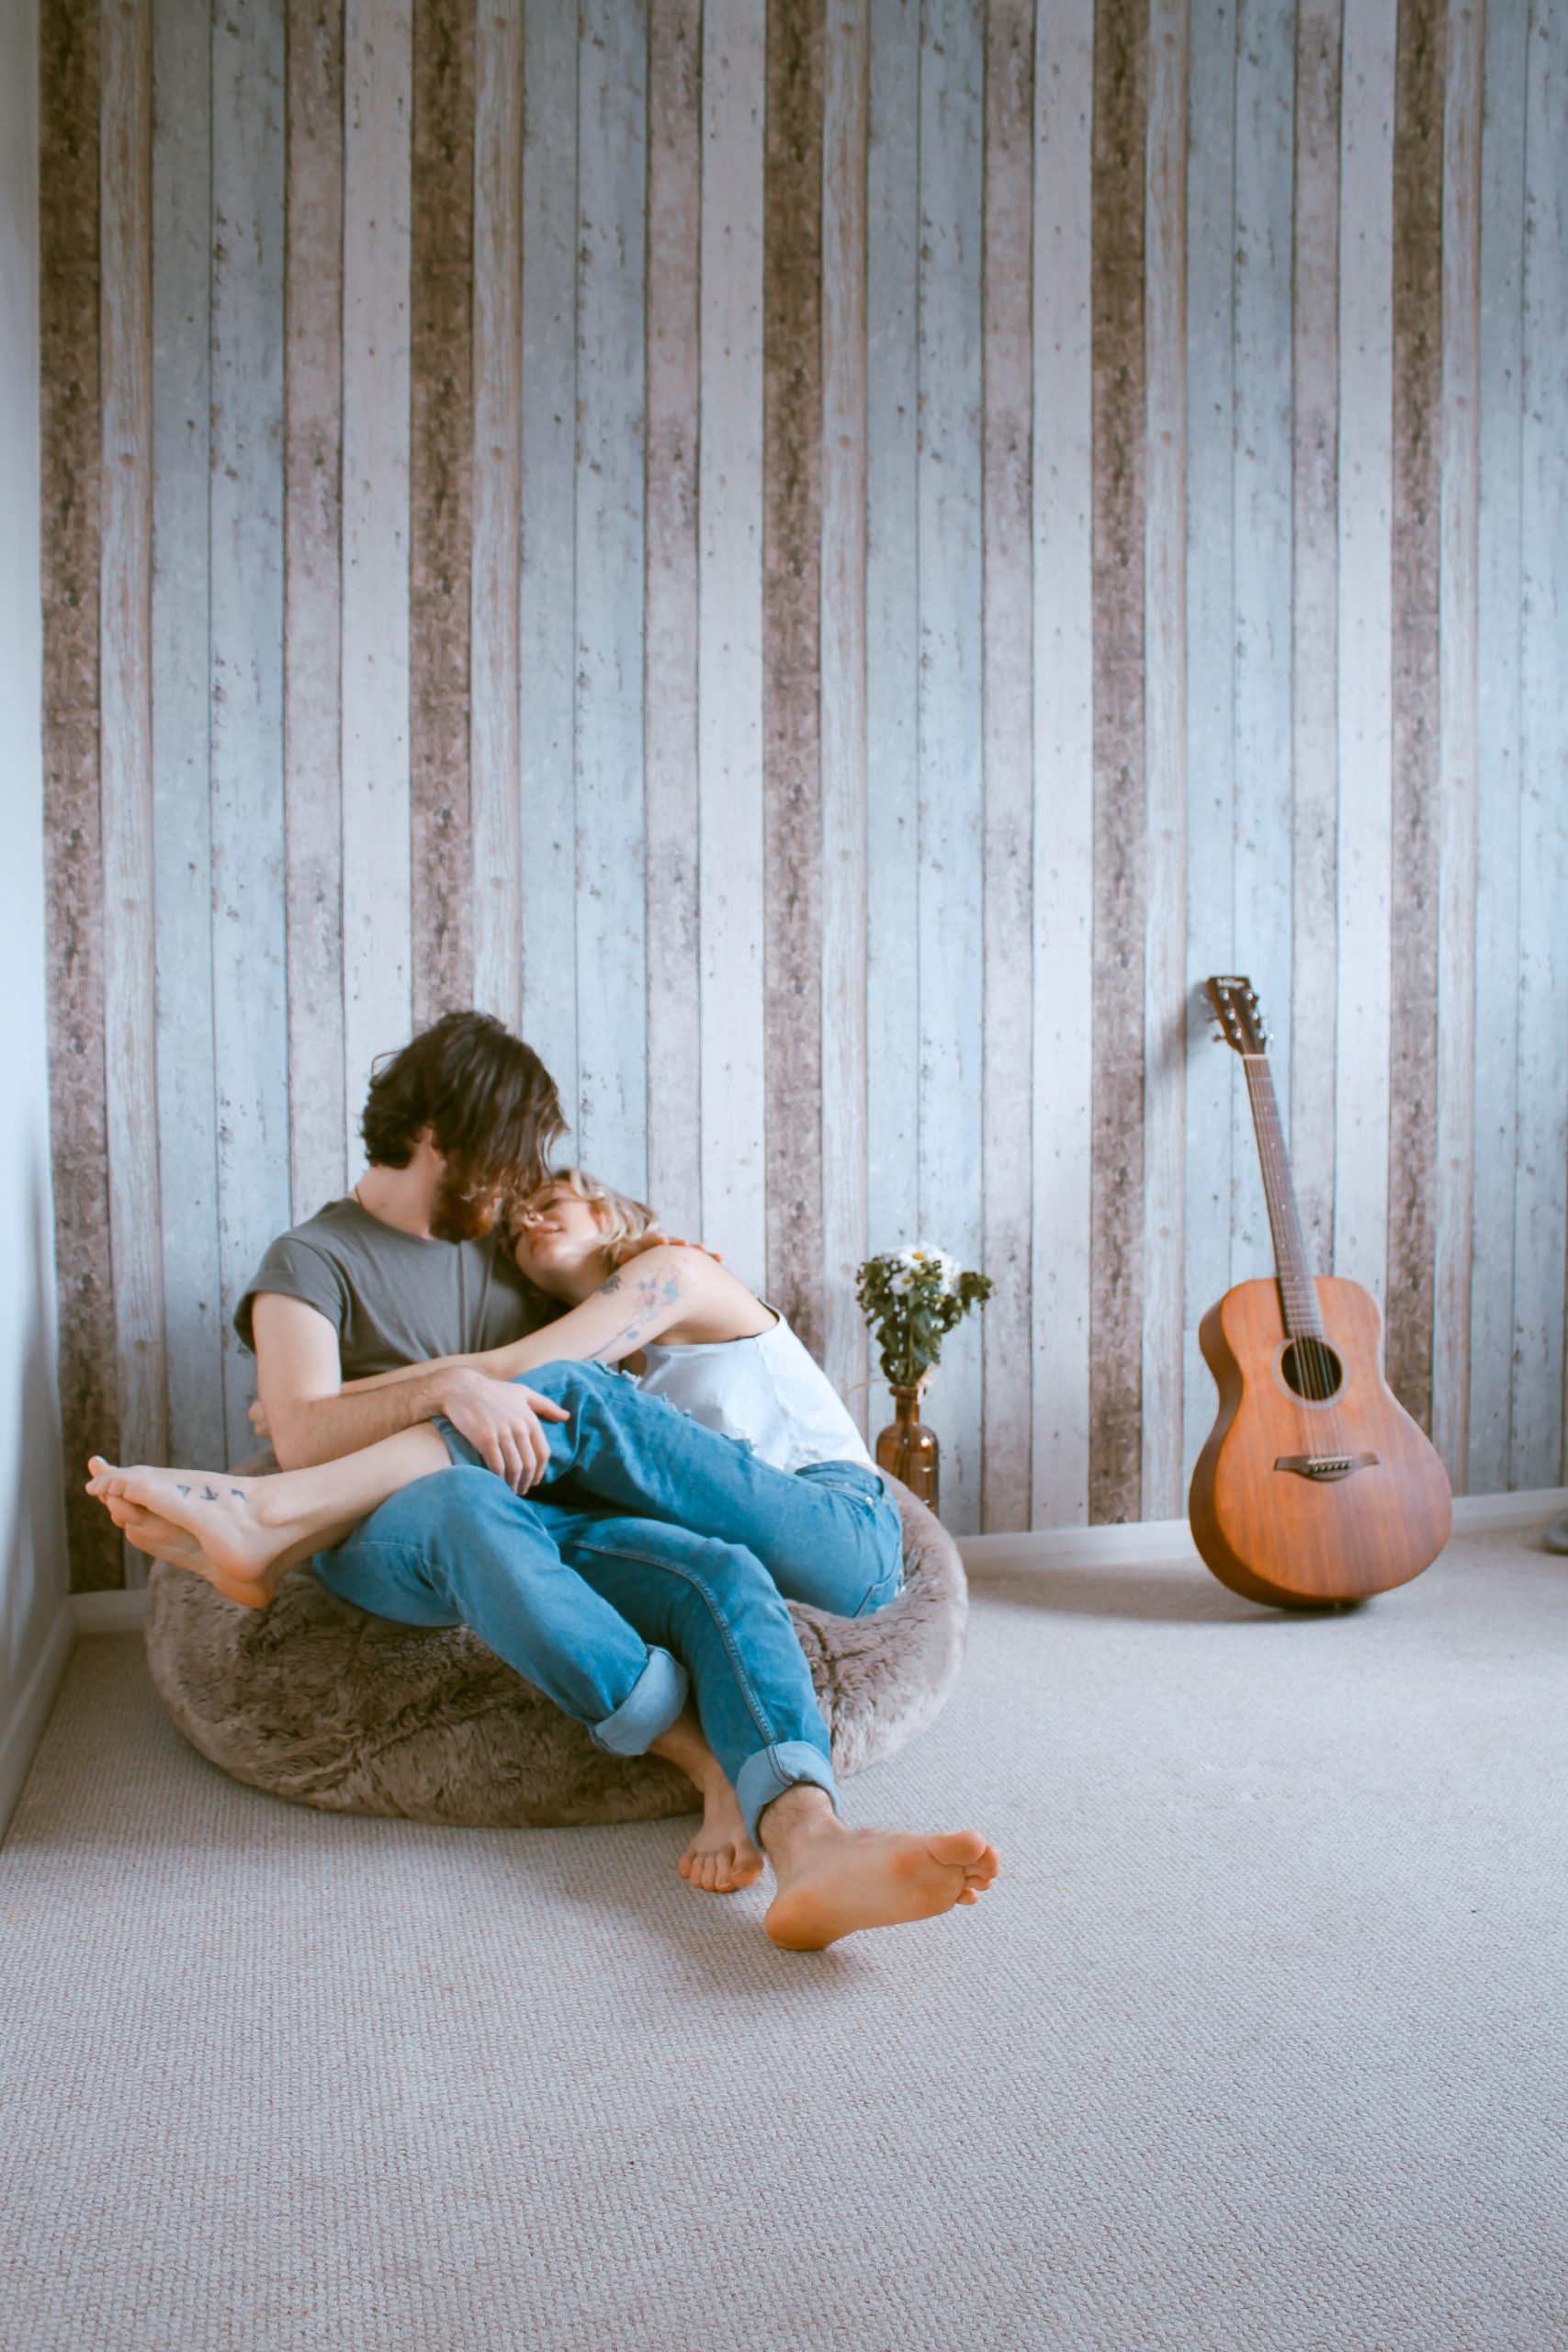 Is boredom creeping into your relationship? See what you can do about it